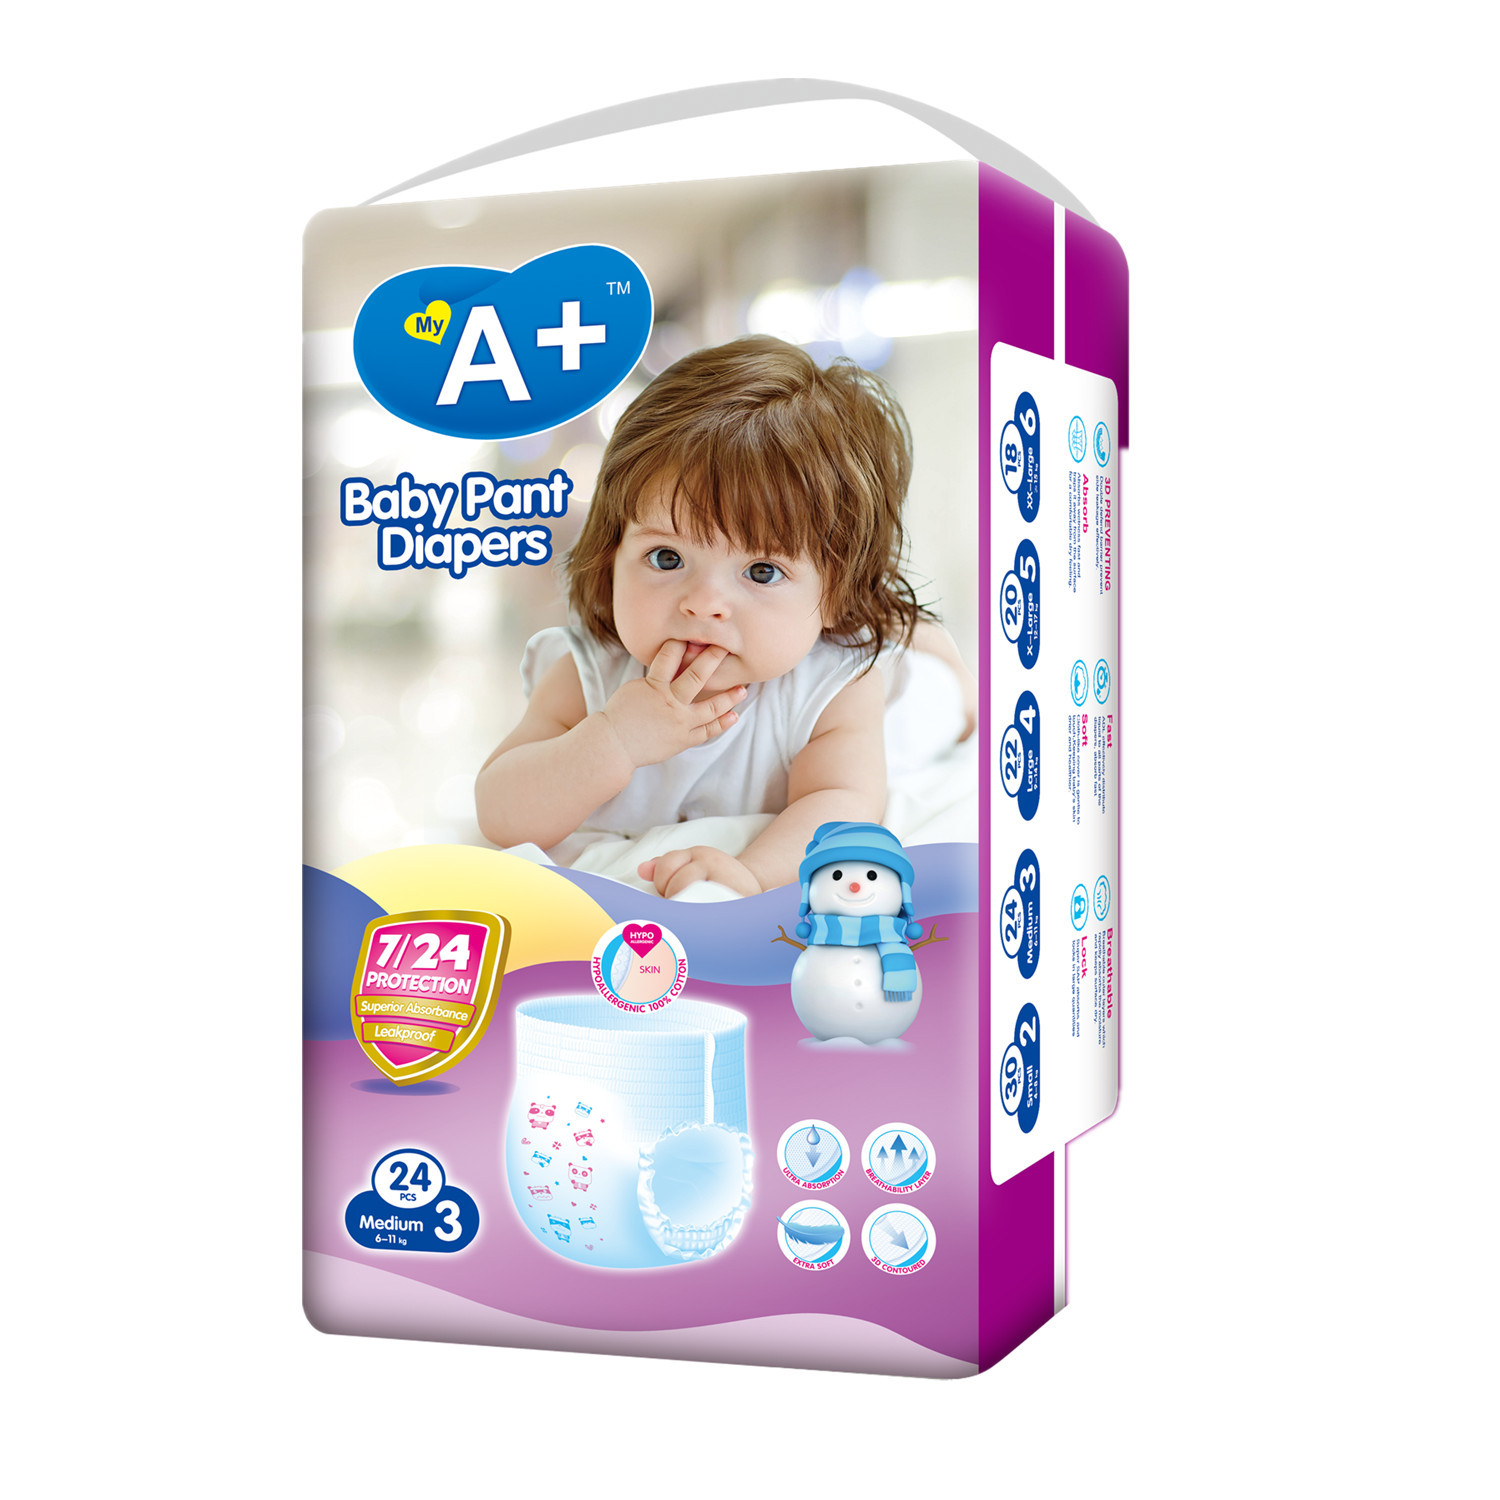 My A+ Baby Pants Diapers Pull Ups Nonwoven Fluff Pulp